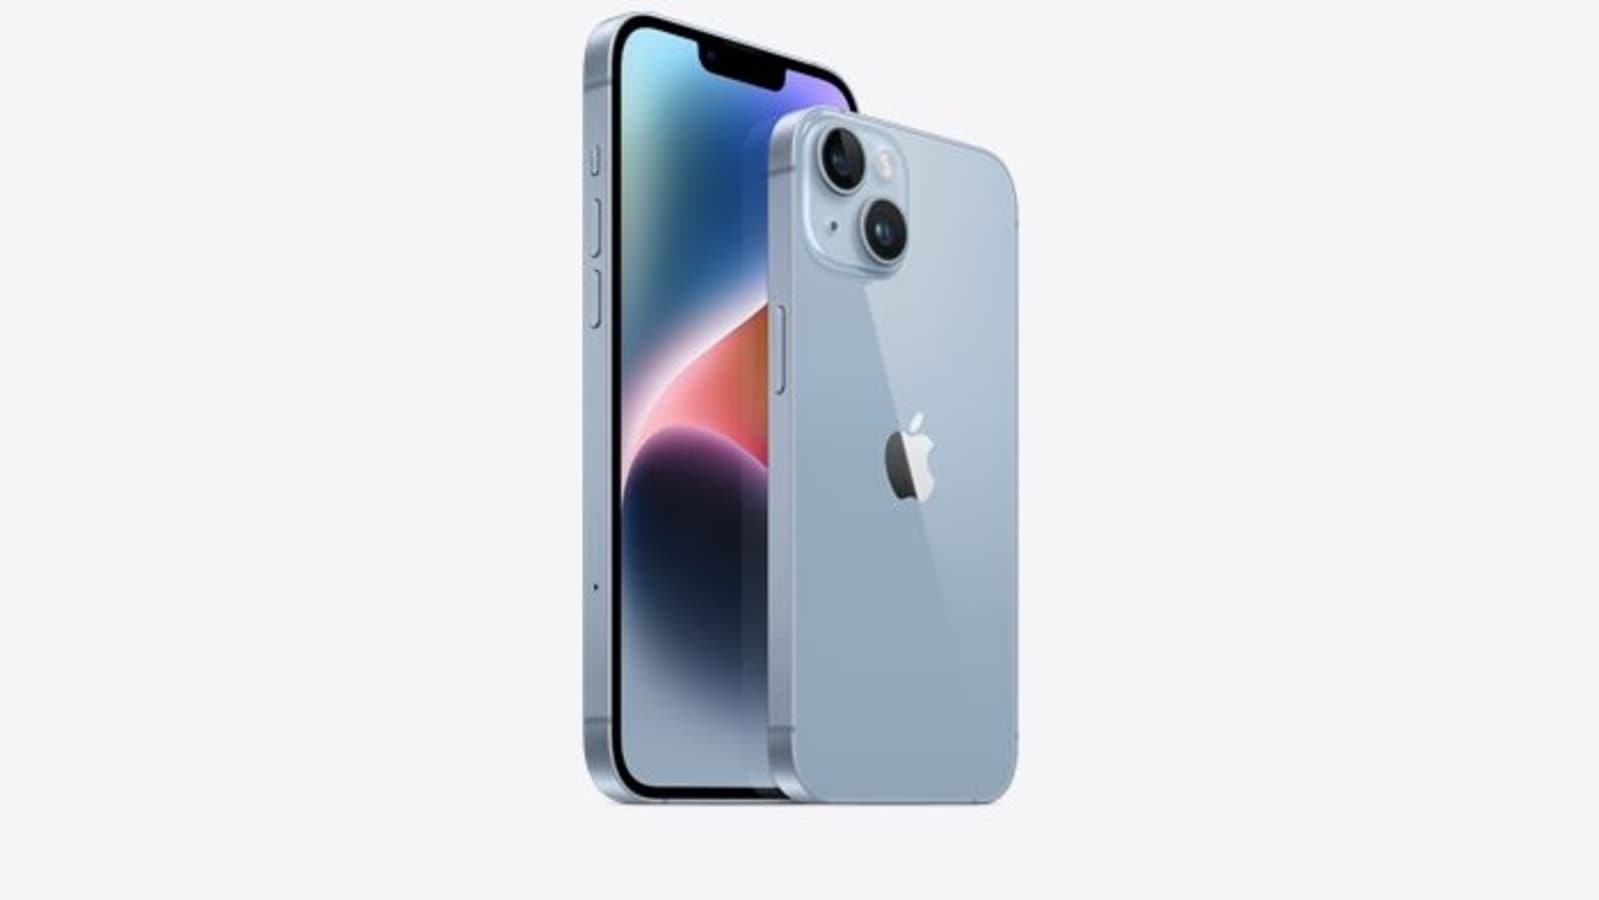 After iPhone 14 Reveal, the iPhone 11 Could Be a Great Bargain - CNET